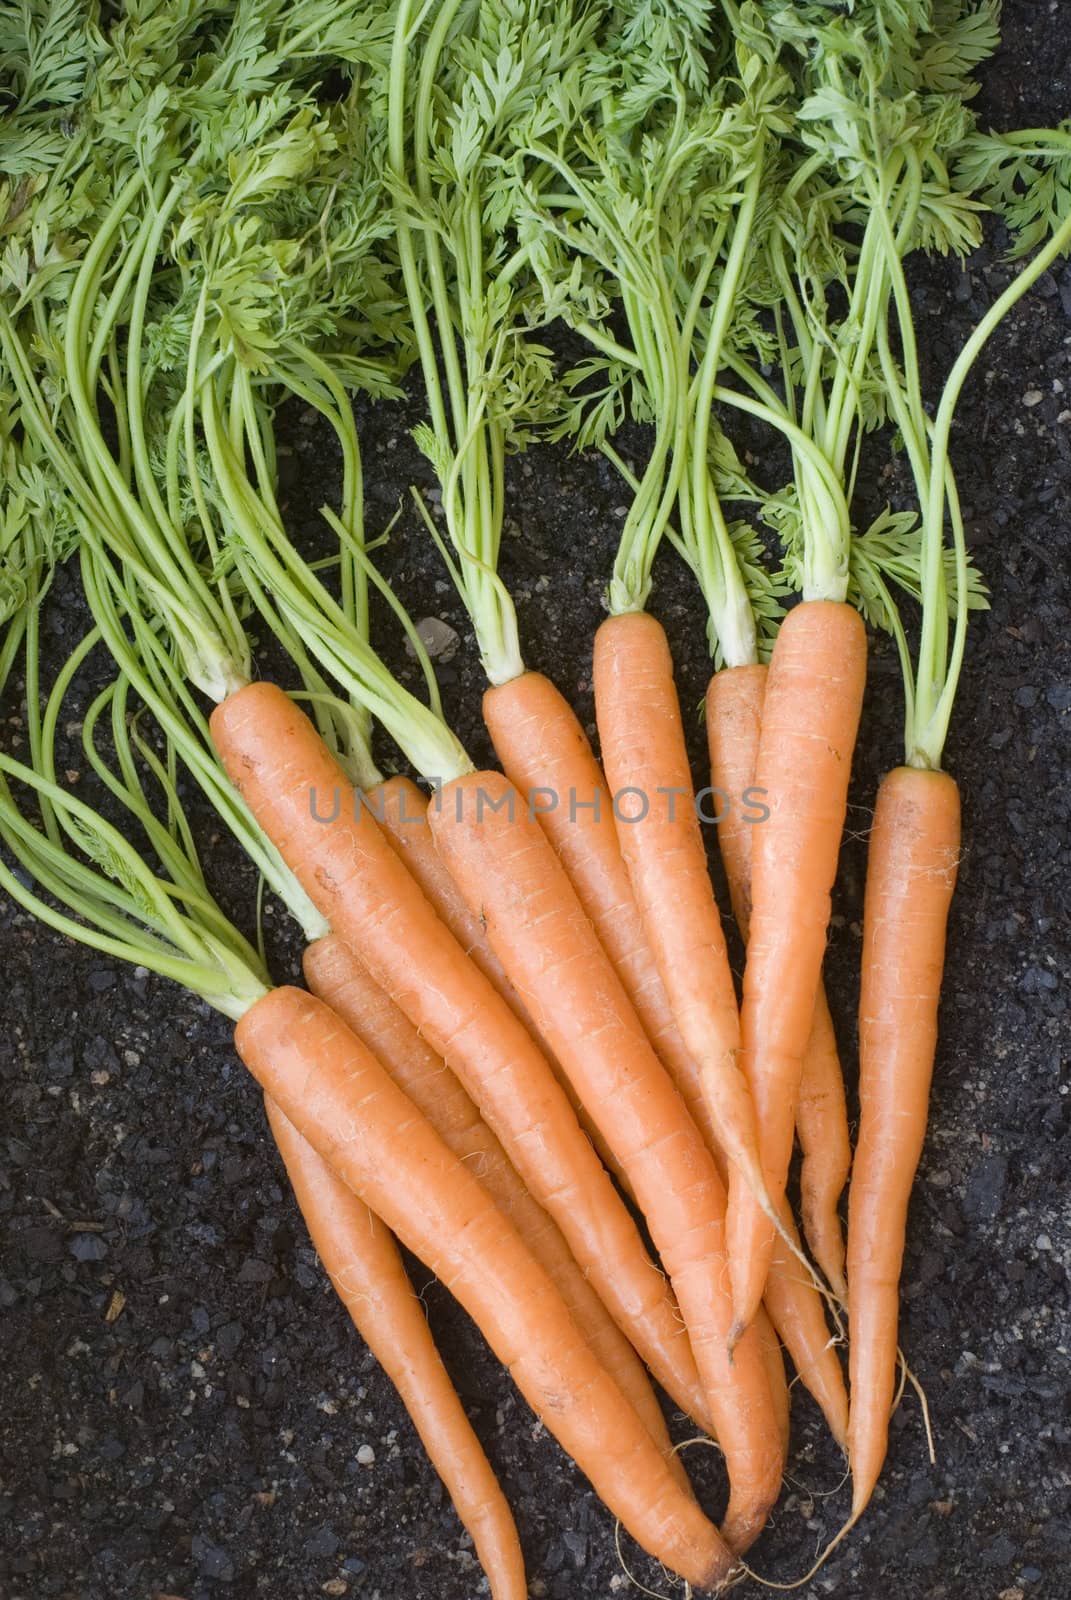 Bunch Of Fresh Carrots by stockarch